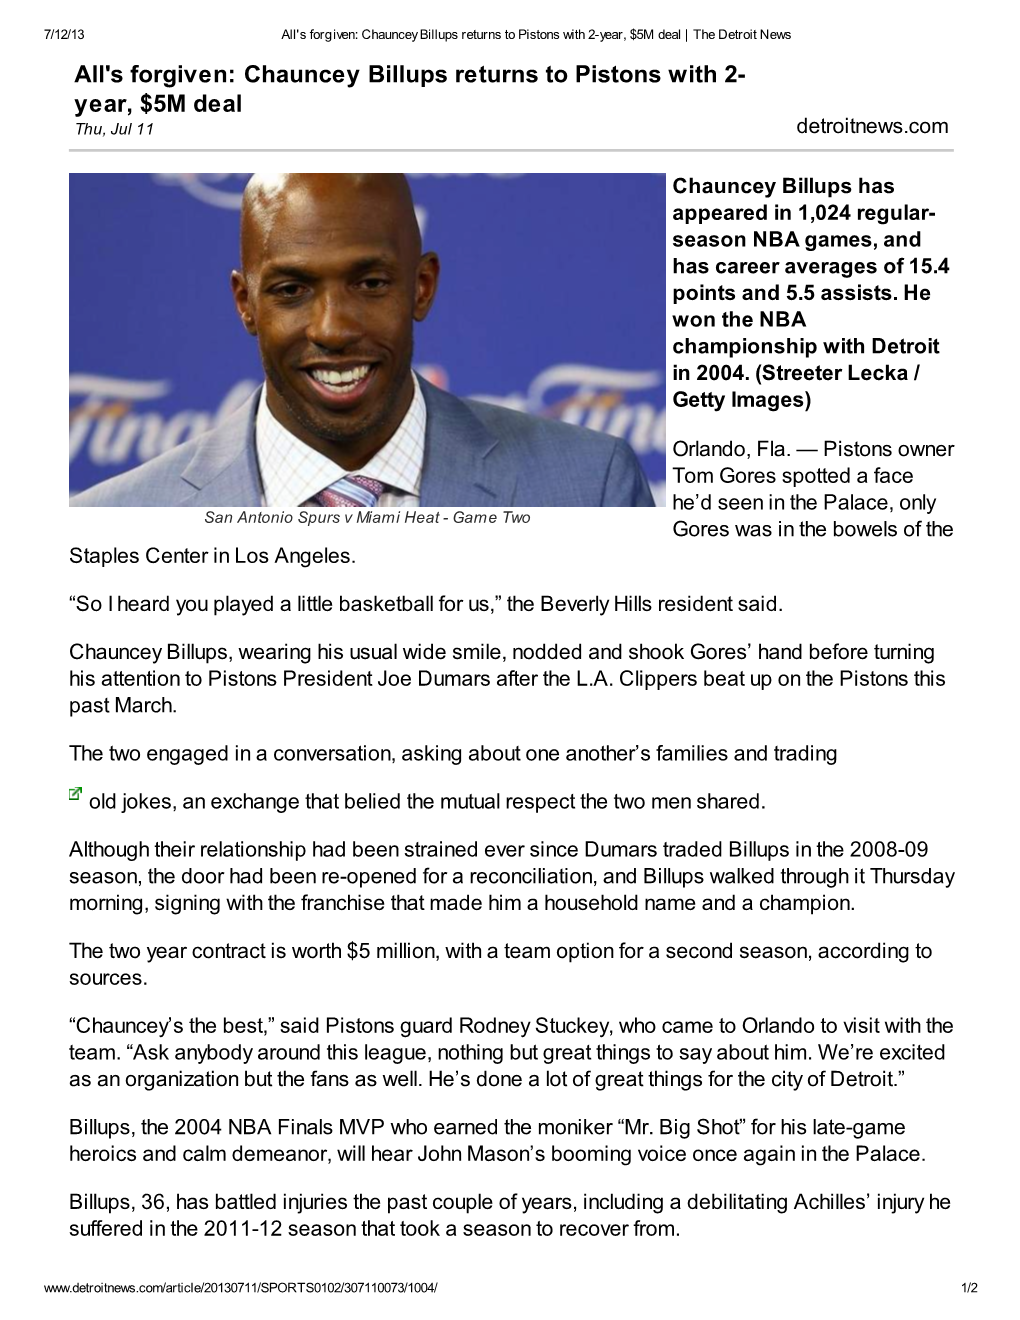 Chauncey Billups Returns to Pistons with 2